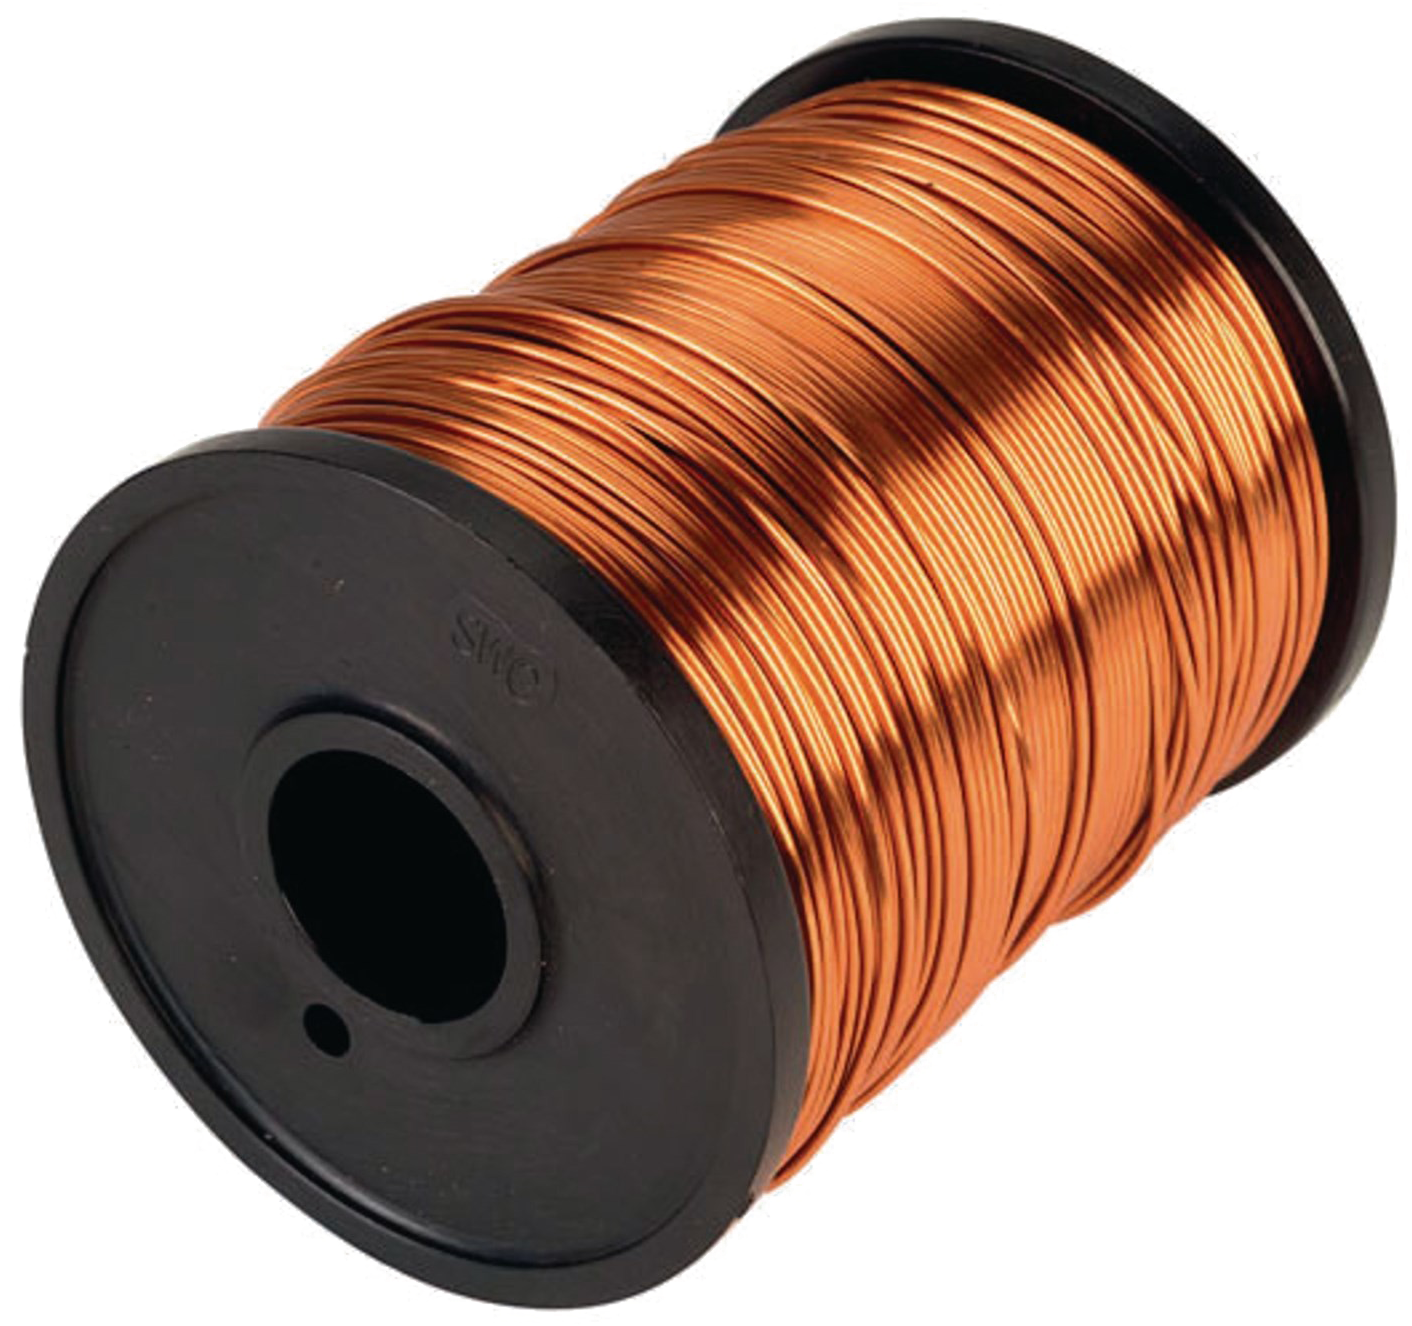 Copper Wire Spool.jpg PNG image